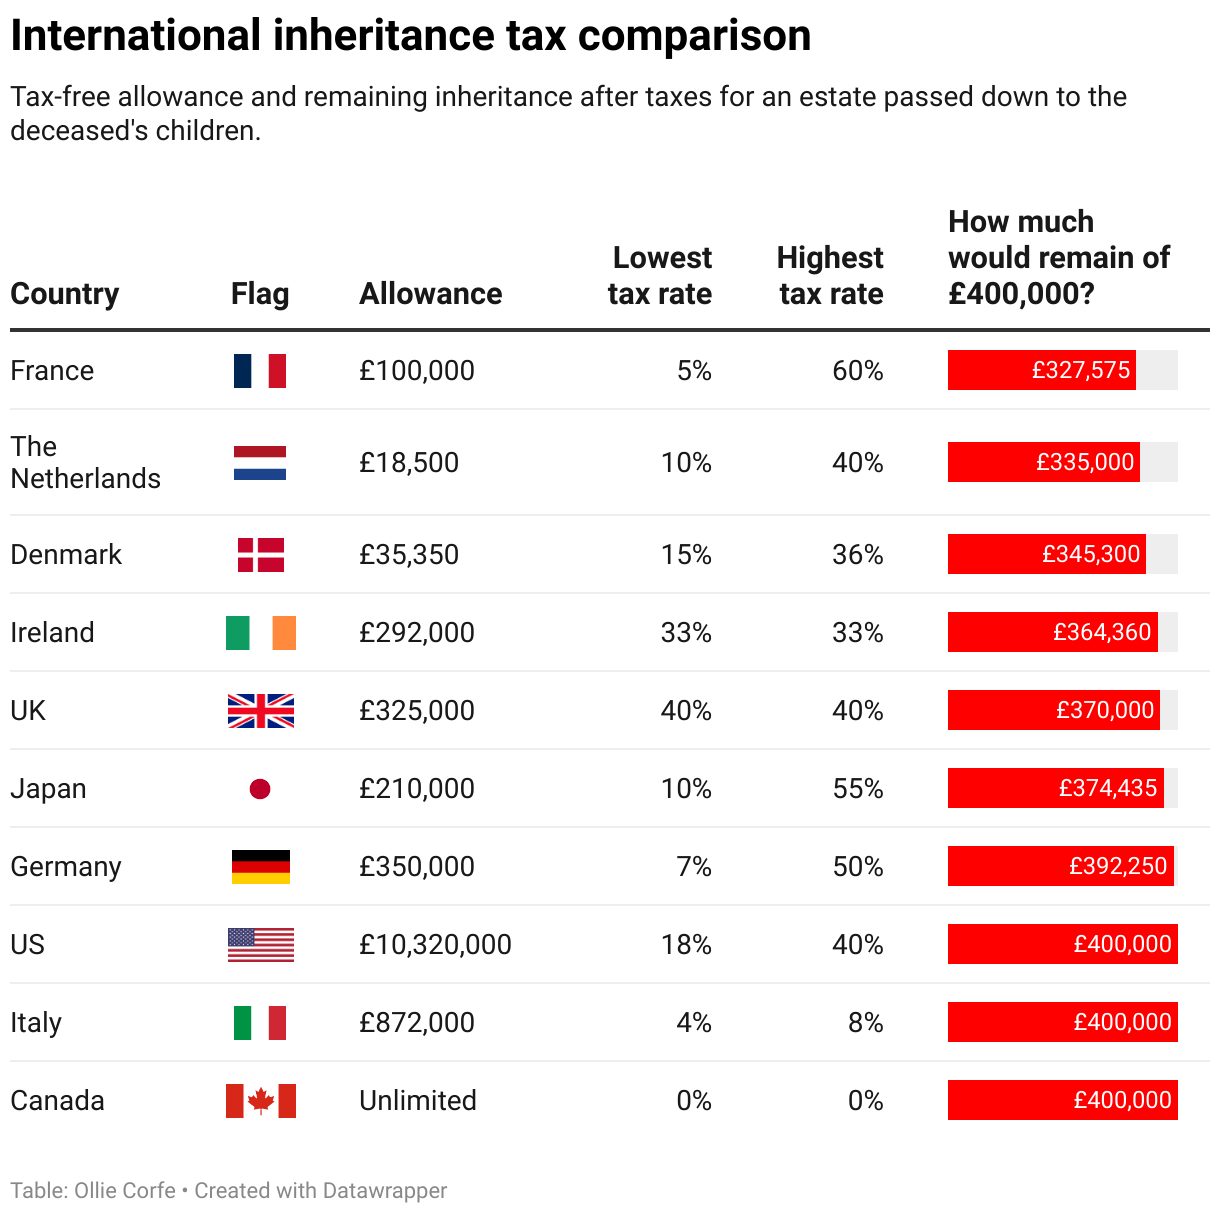 Table of inheritance taxes compared.